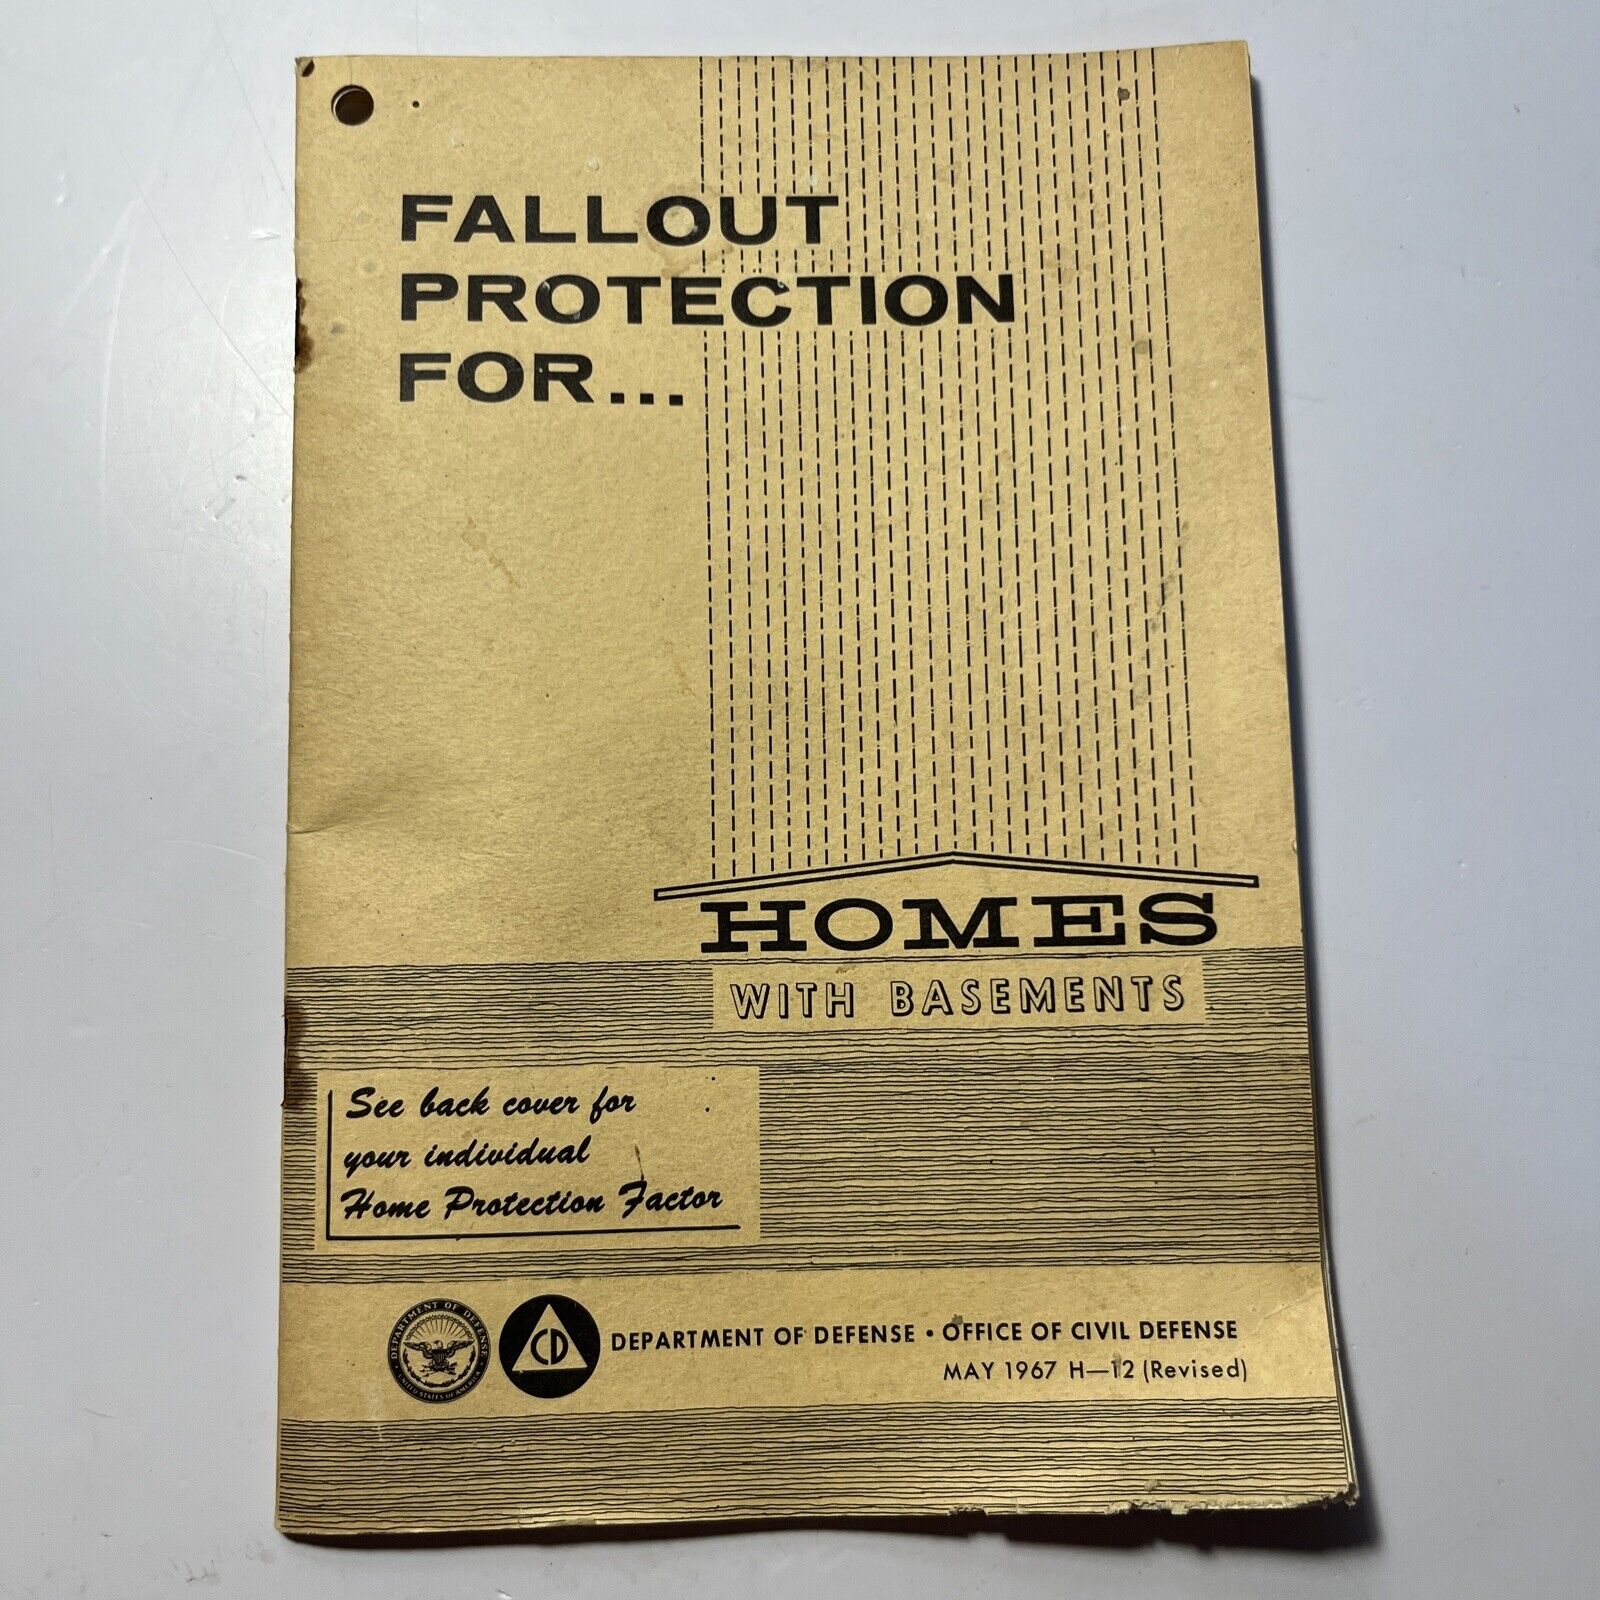 May 1967 Fallout Protection For Homes With Basements Pamphlet Dept Of Defense